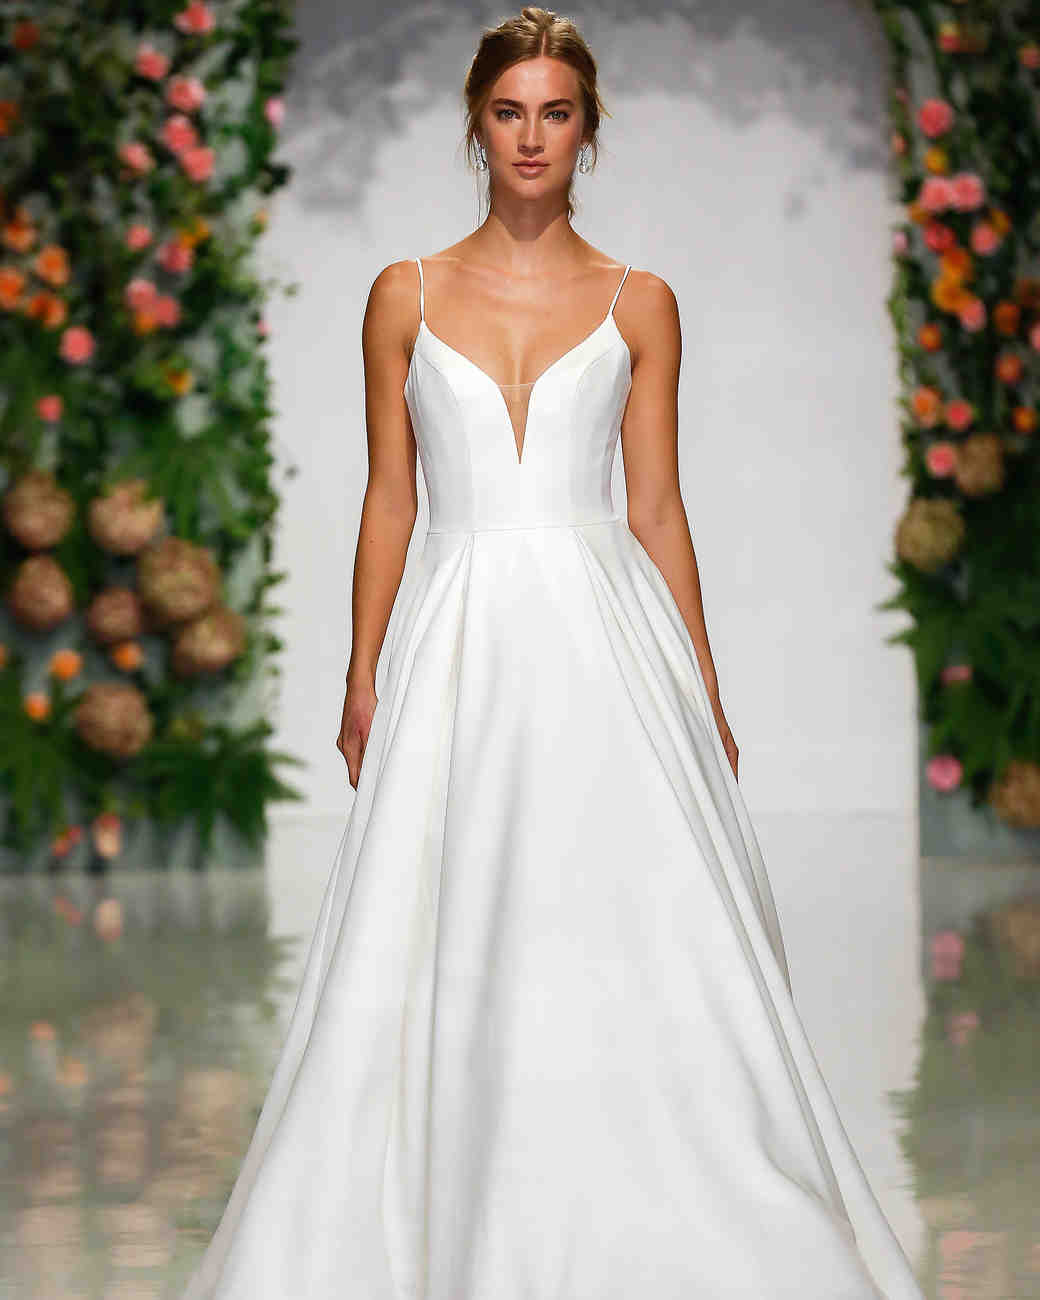 Wedding Dresses Plain Top 10 - Find the Perfect Venue for Your Special ...